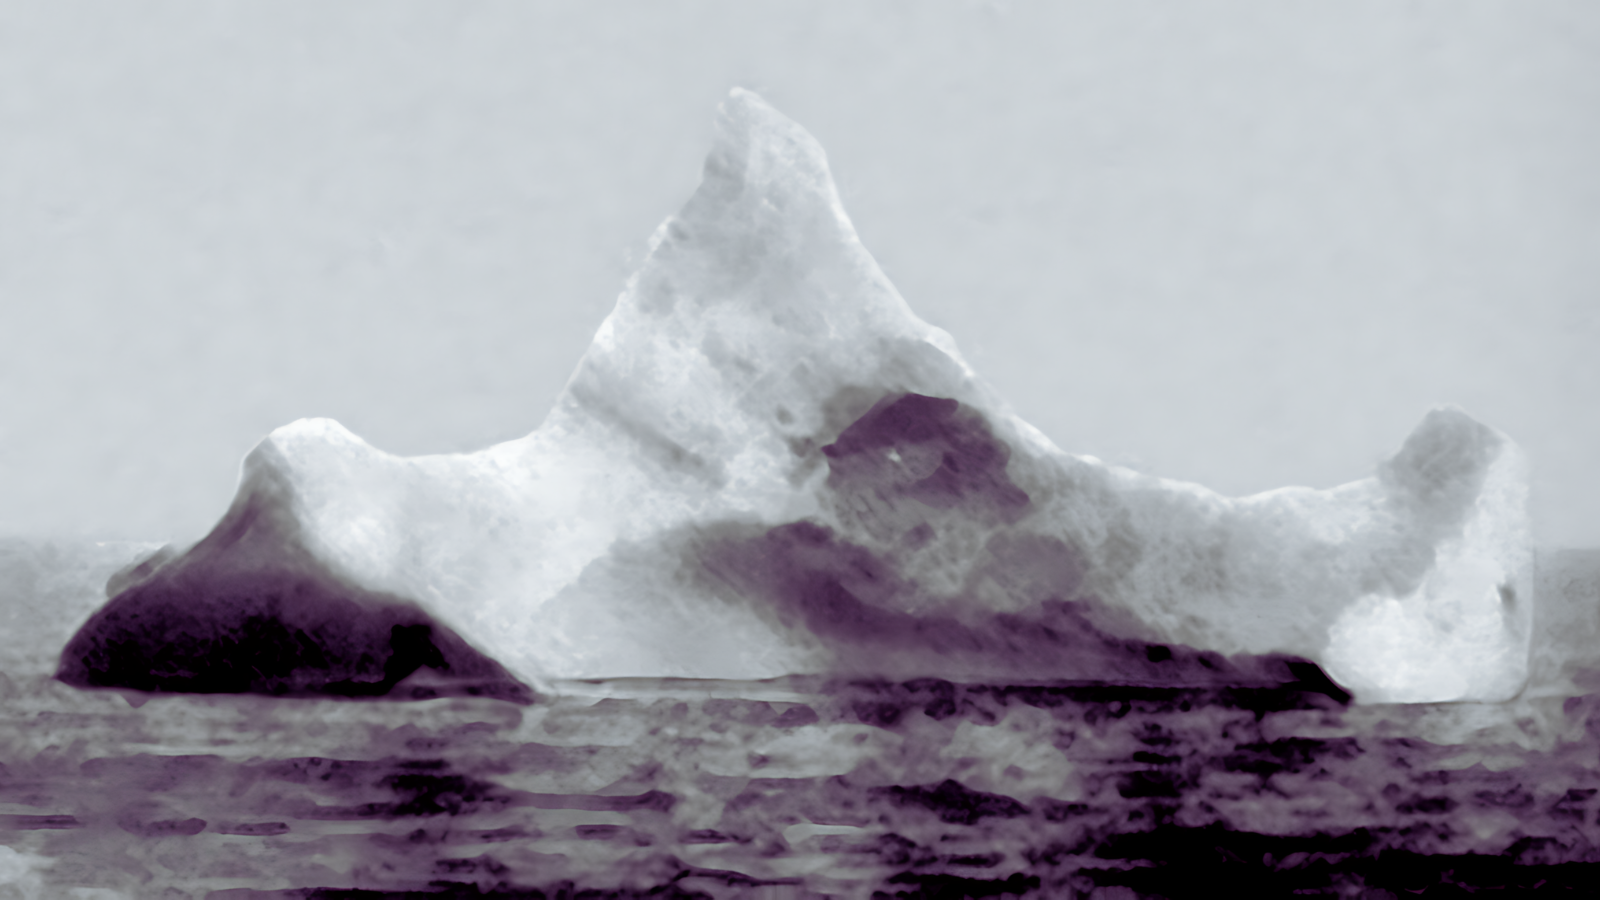 The iceberg thought to have been hit by Titanic, photographed on the morning of 15 April 1912. Note the dark spot just along the berg's waterline, which was described by onlookers as a smear of red paint thought to be of a ship.